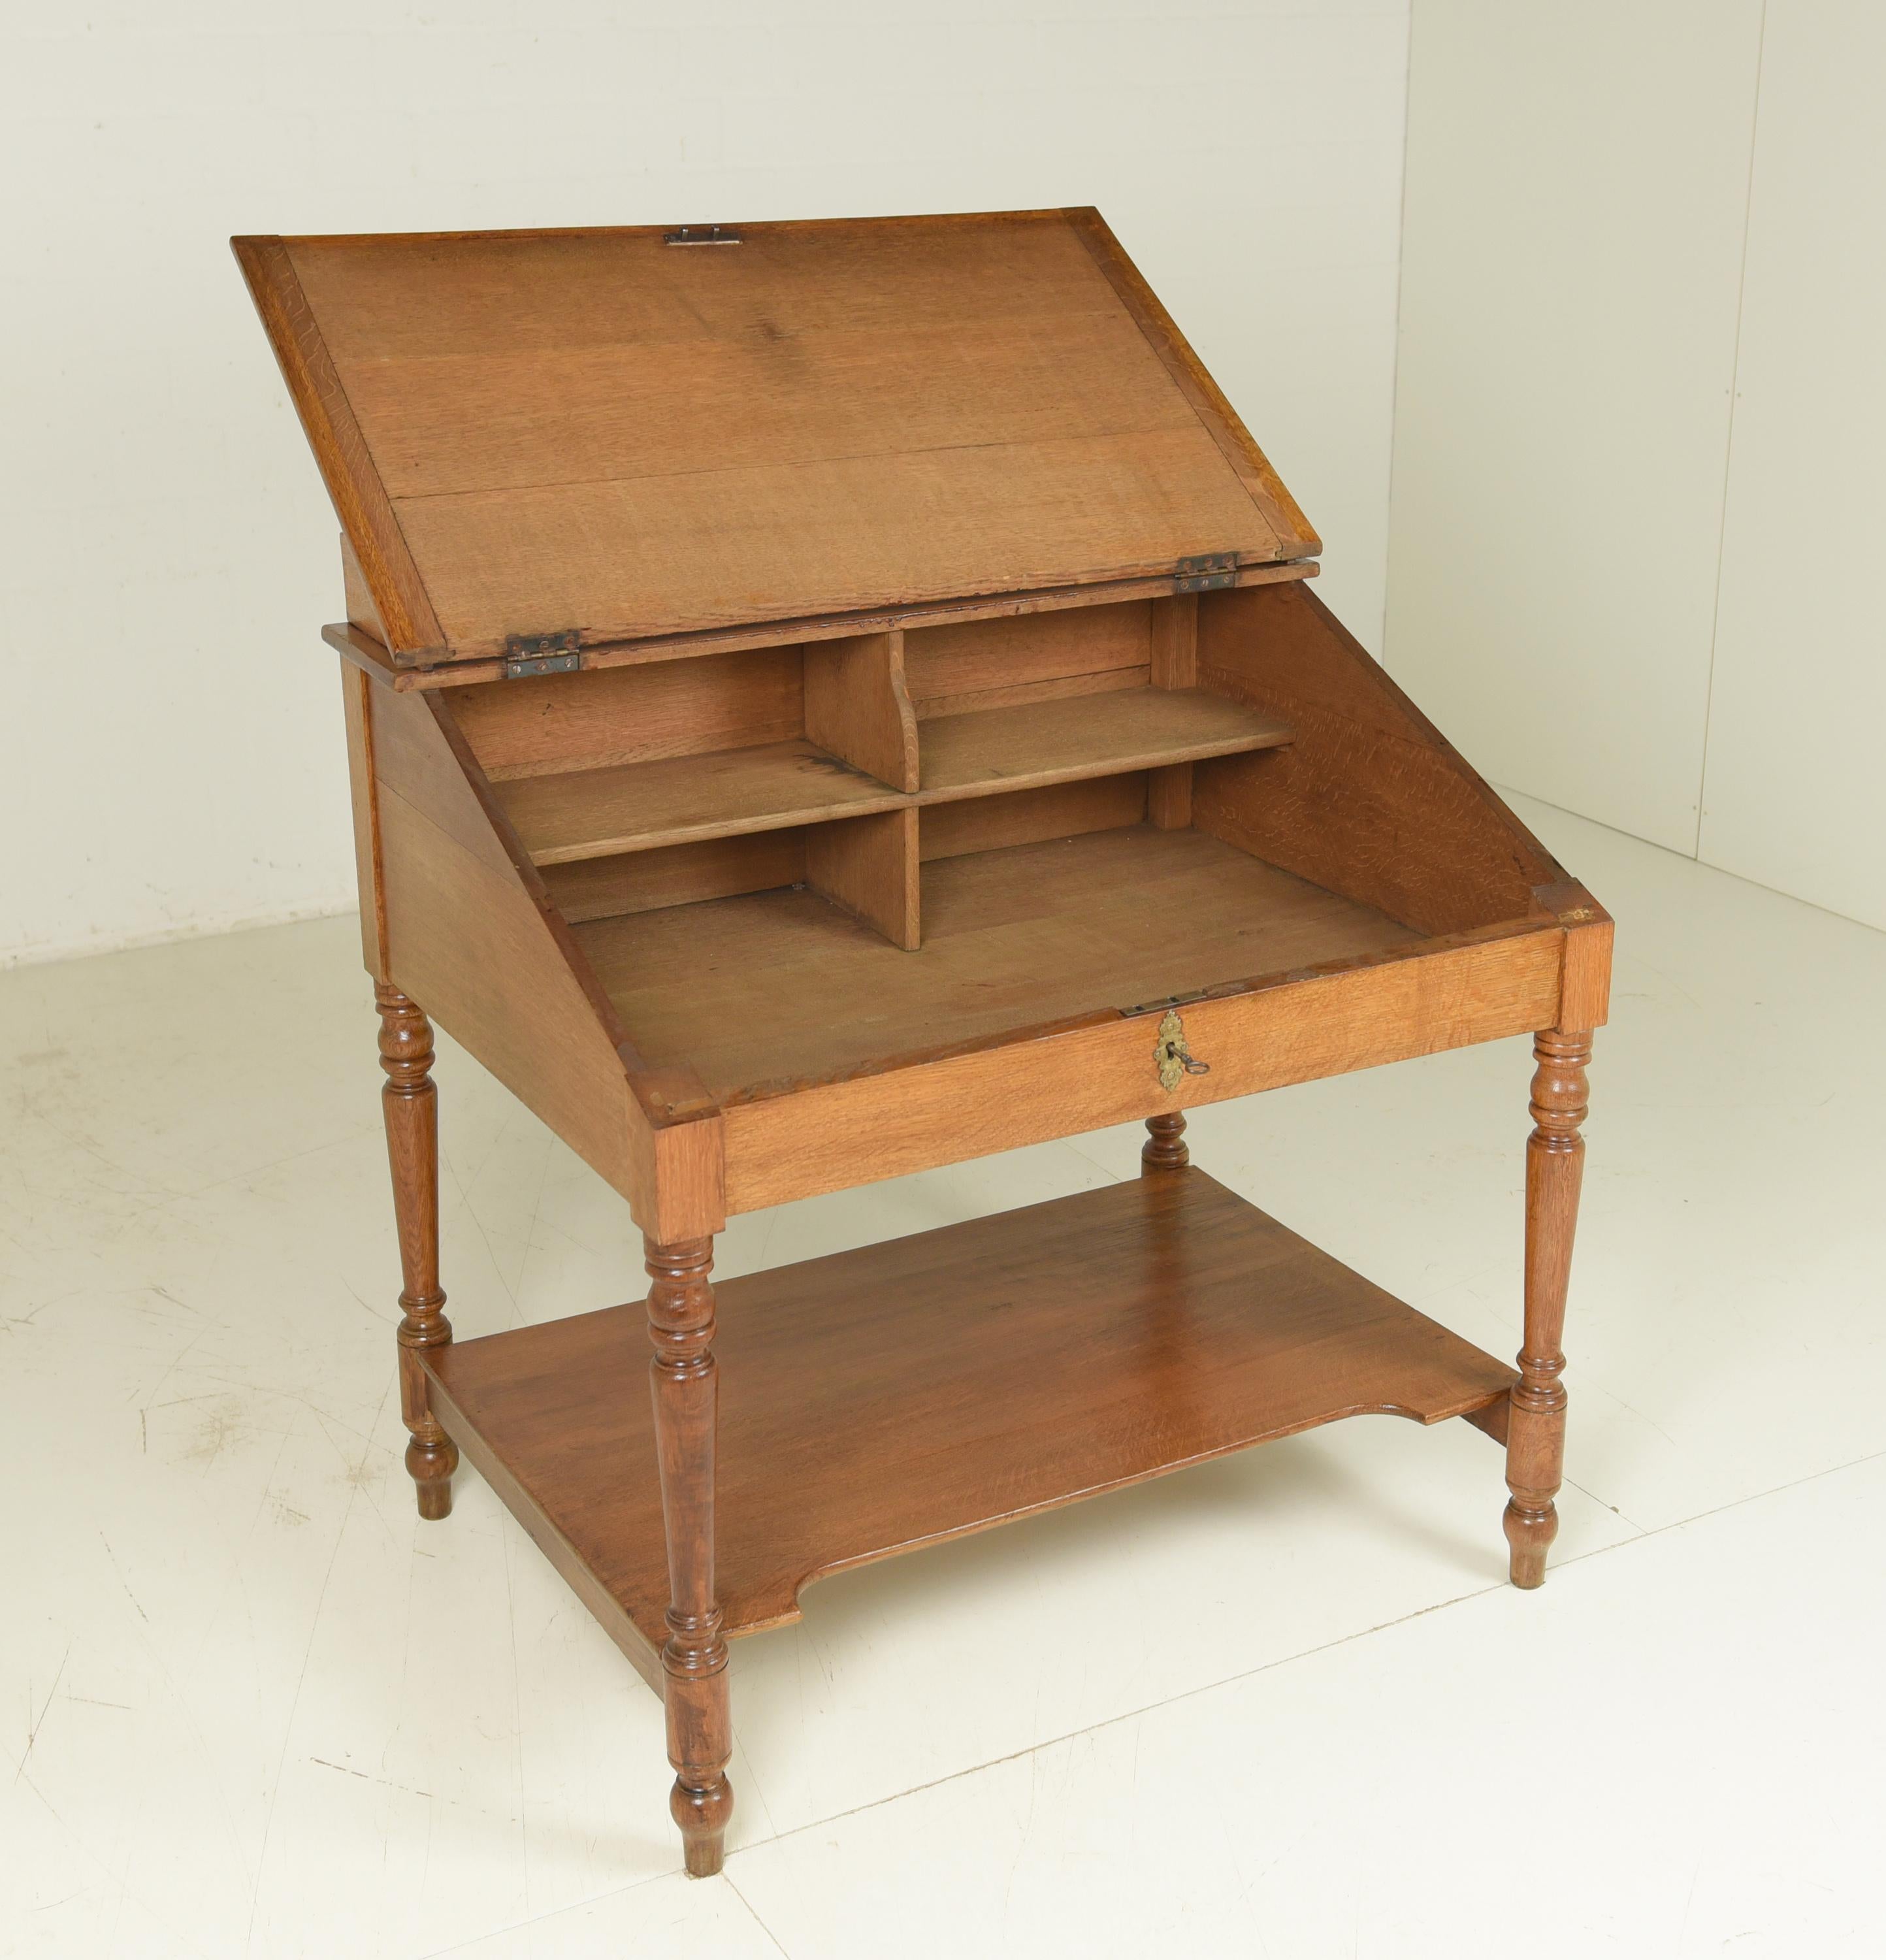 Writing desk restored Gründerzeit around 1880 solid oak seat desk

Features:
With lockable hinged lid
Beautiful patina
Attractive, quite light color tone
Quite wide model

Additional information:
Material: Completely solid oak
Dimensions: